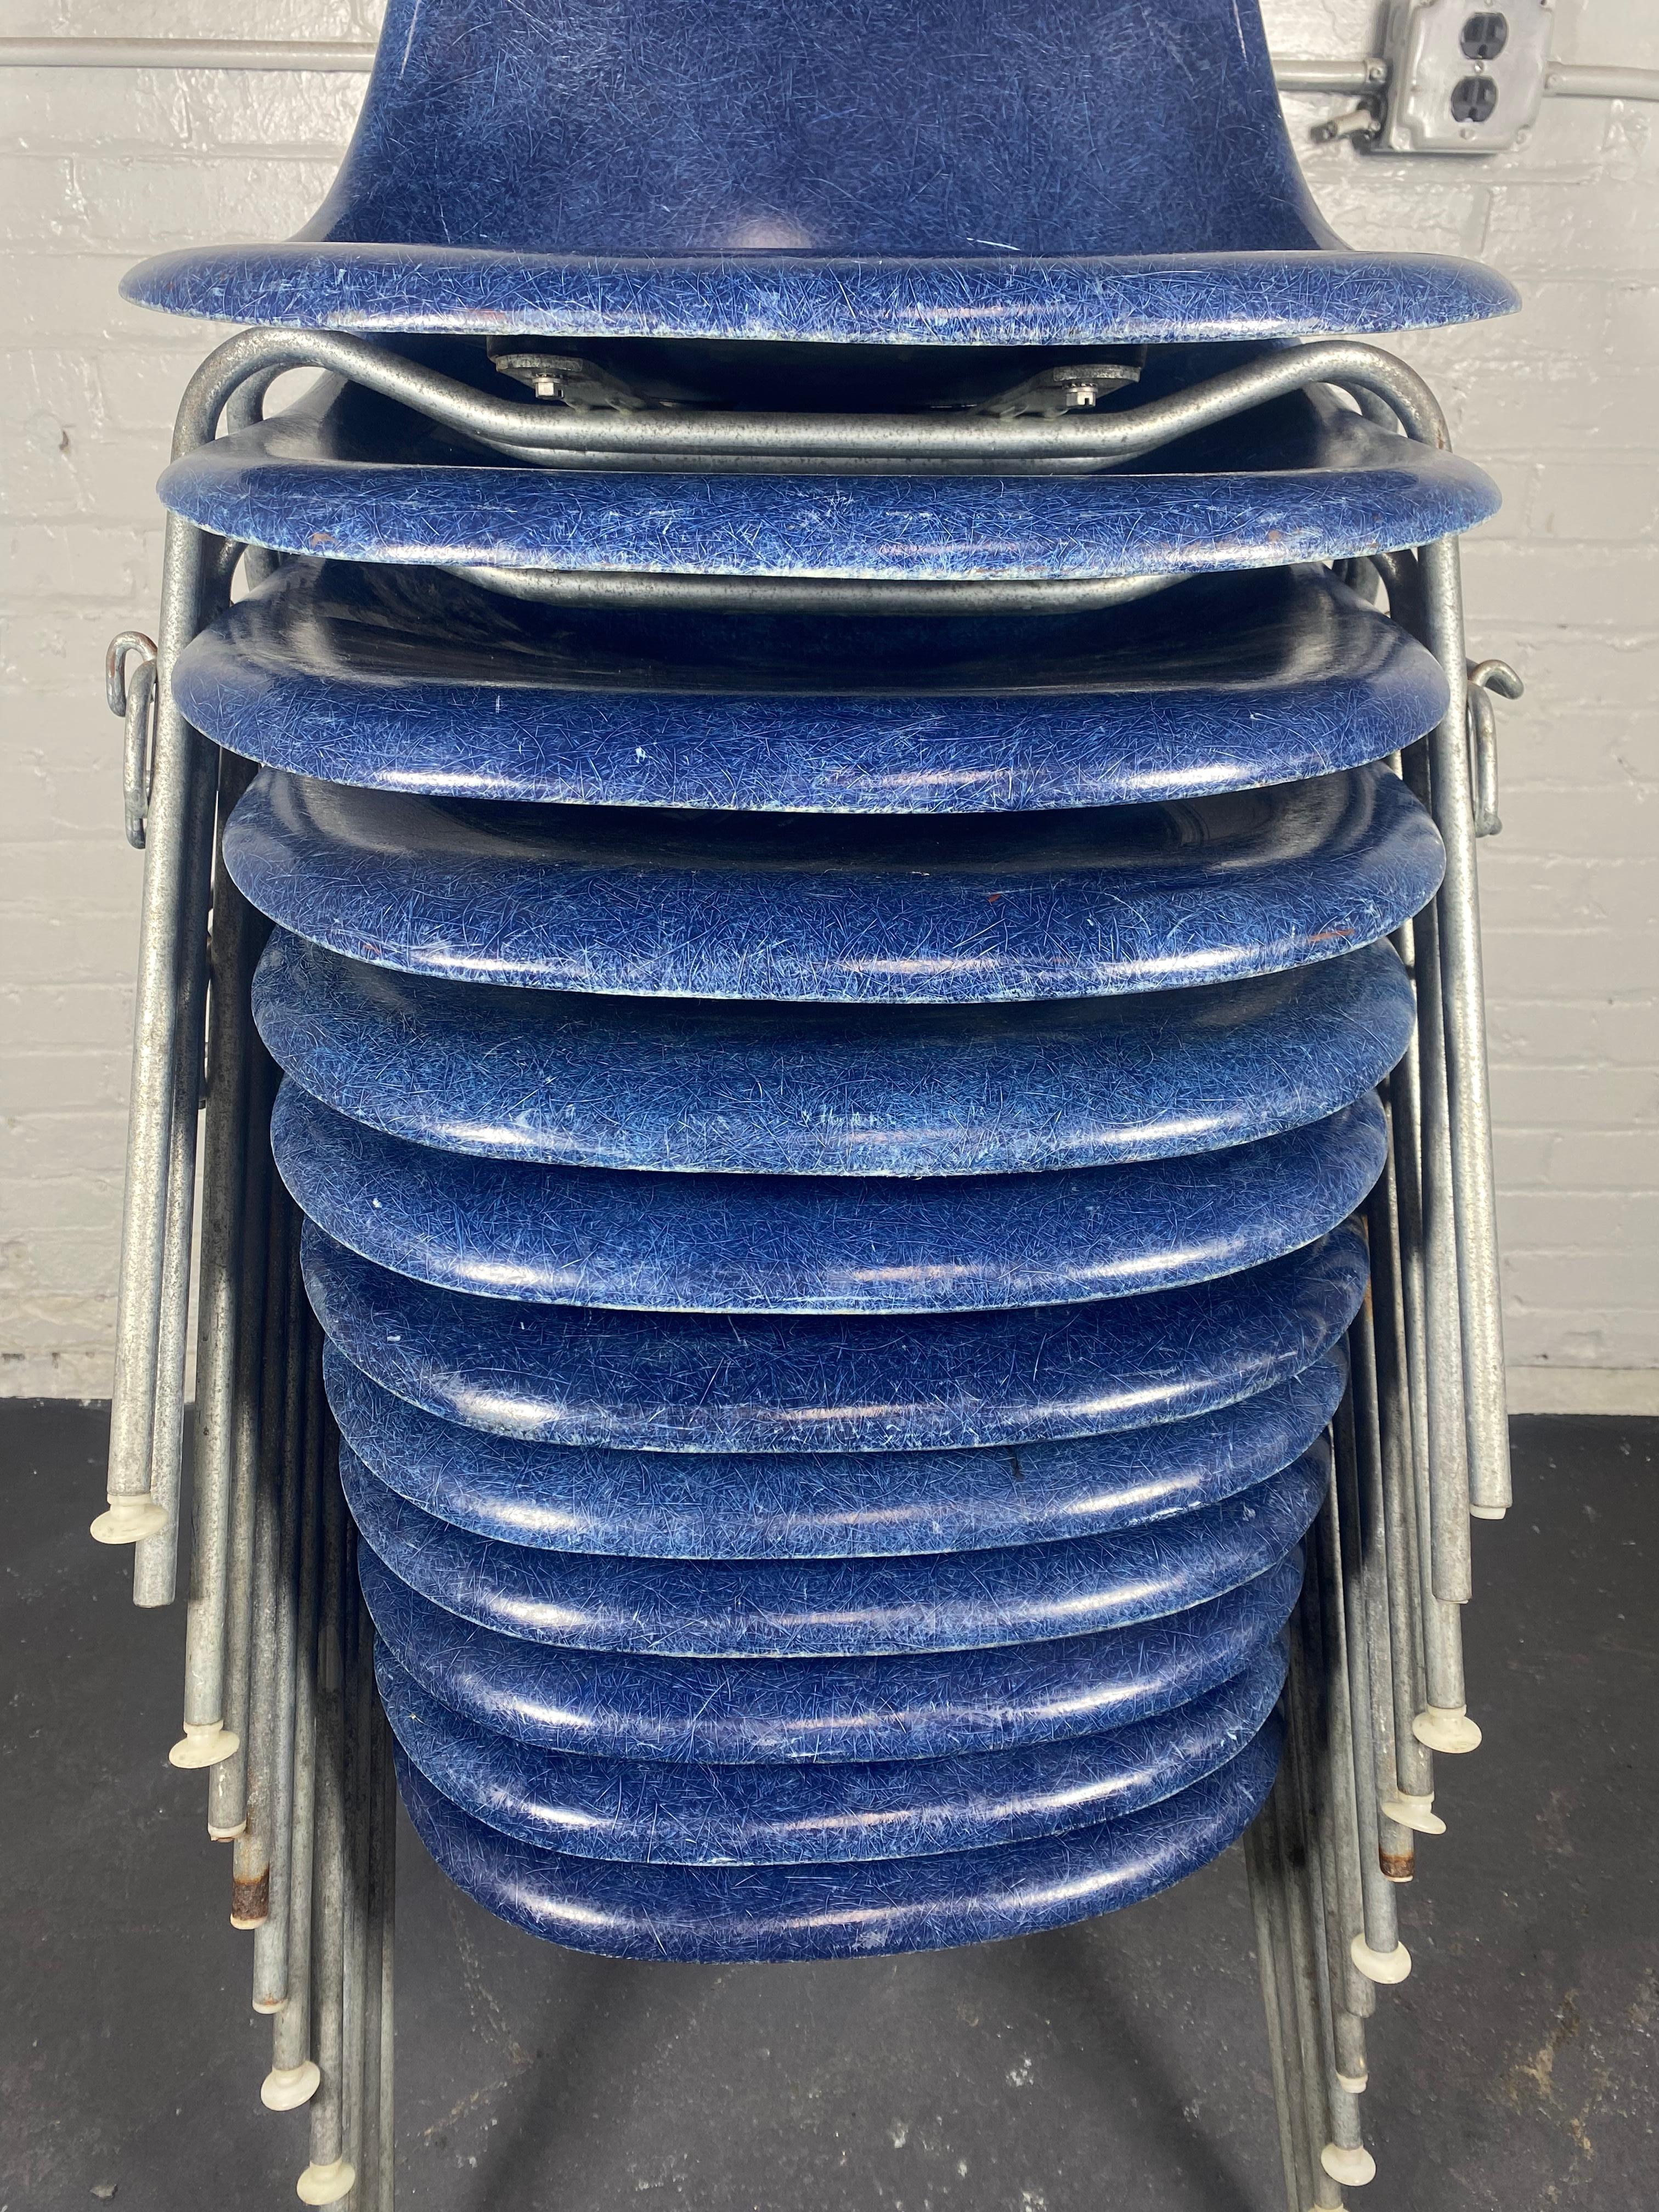 12 DSS Stacking Chairs Charles & Ray Eames Herman Miller, Blue Fiberglass, 1960s For Sale 1